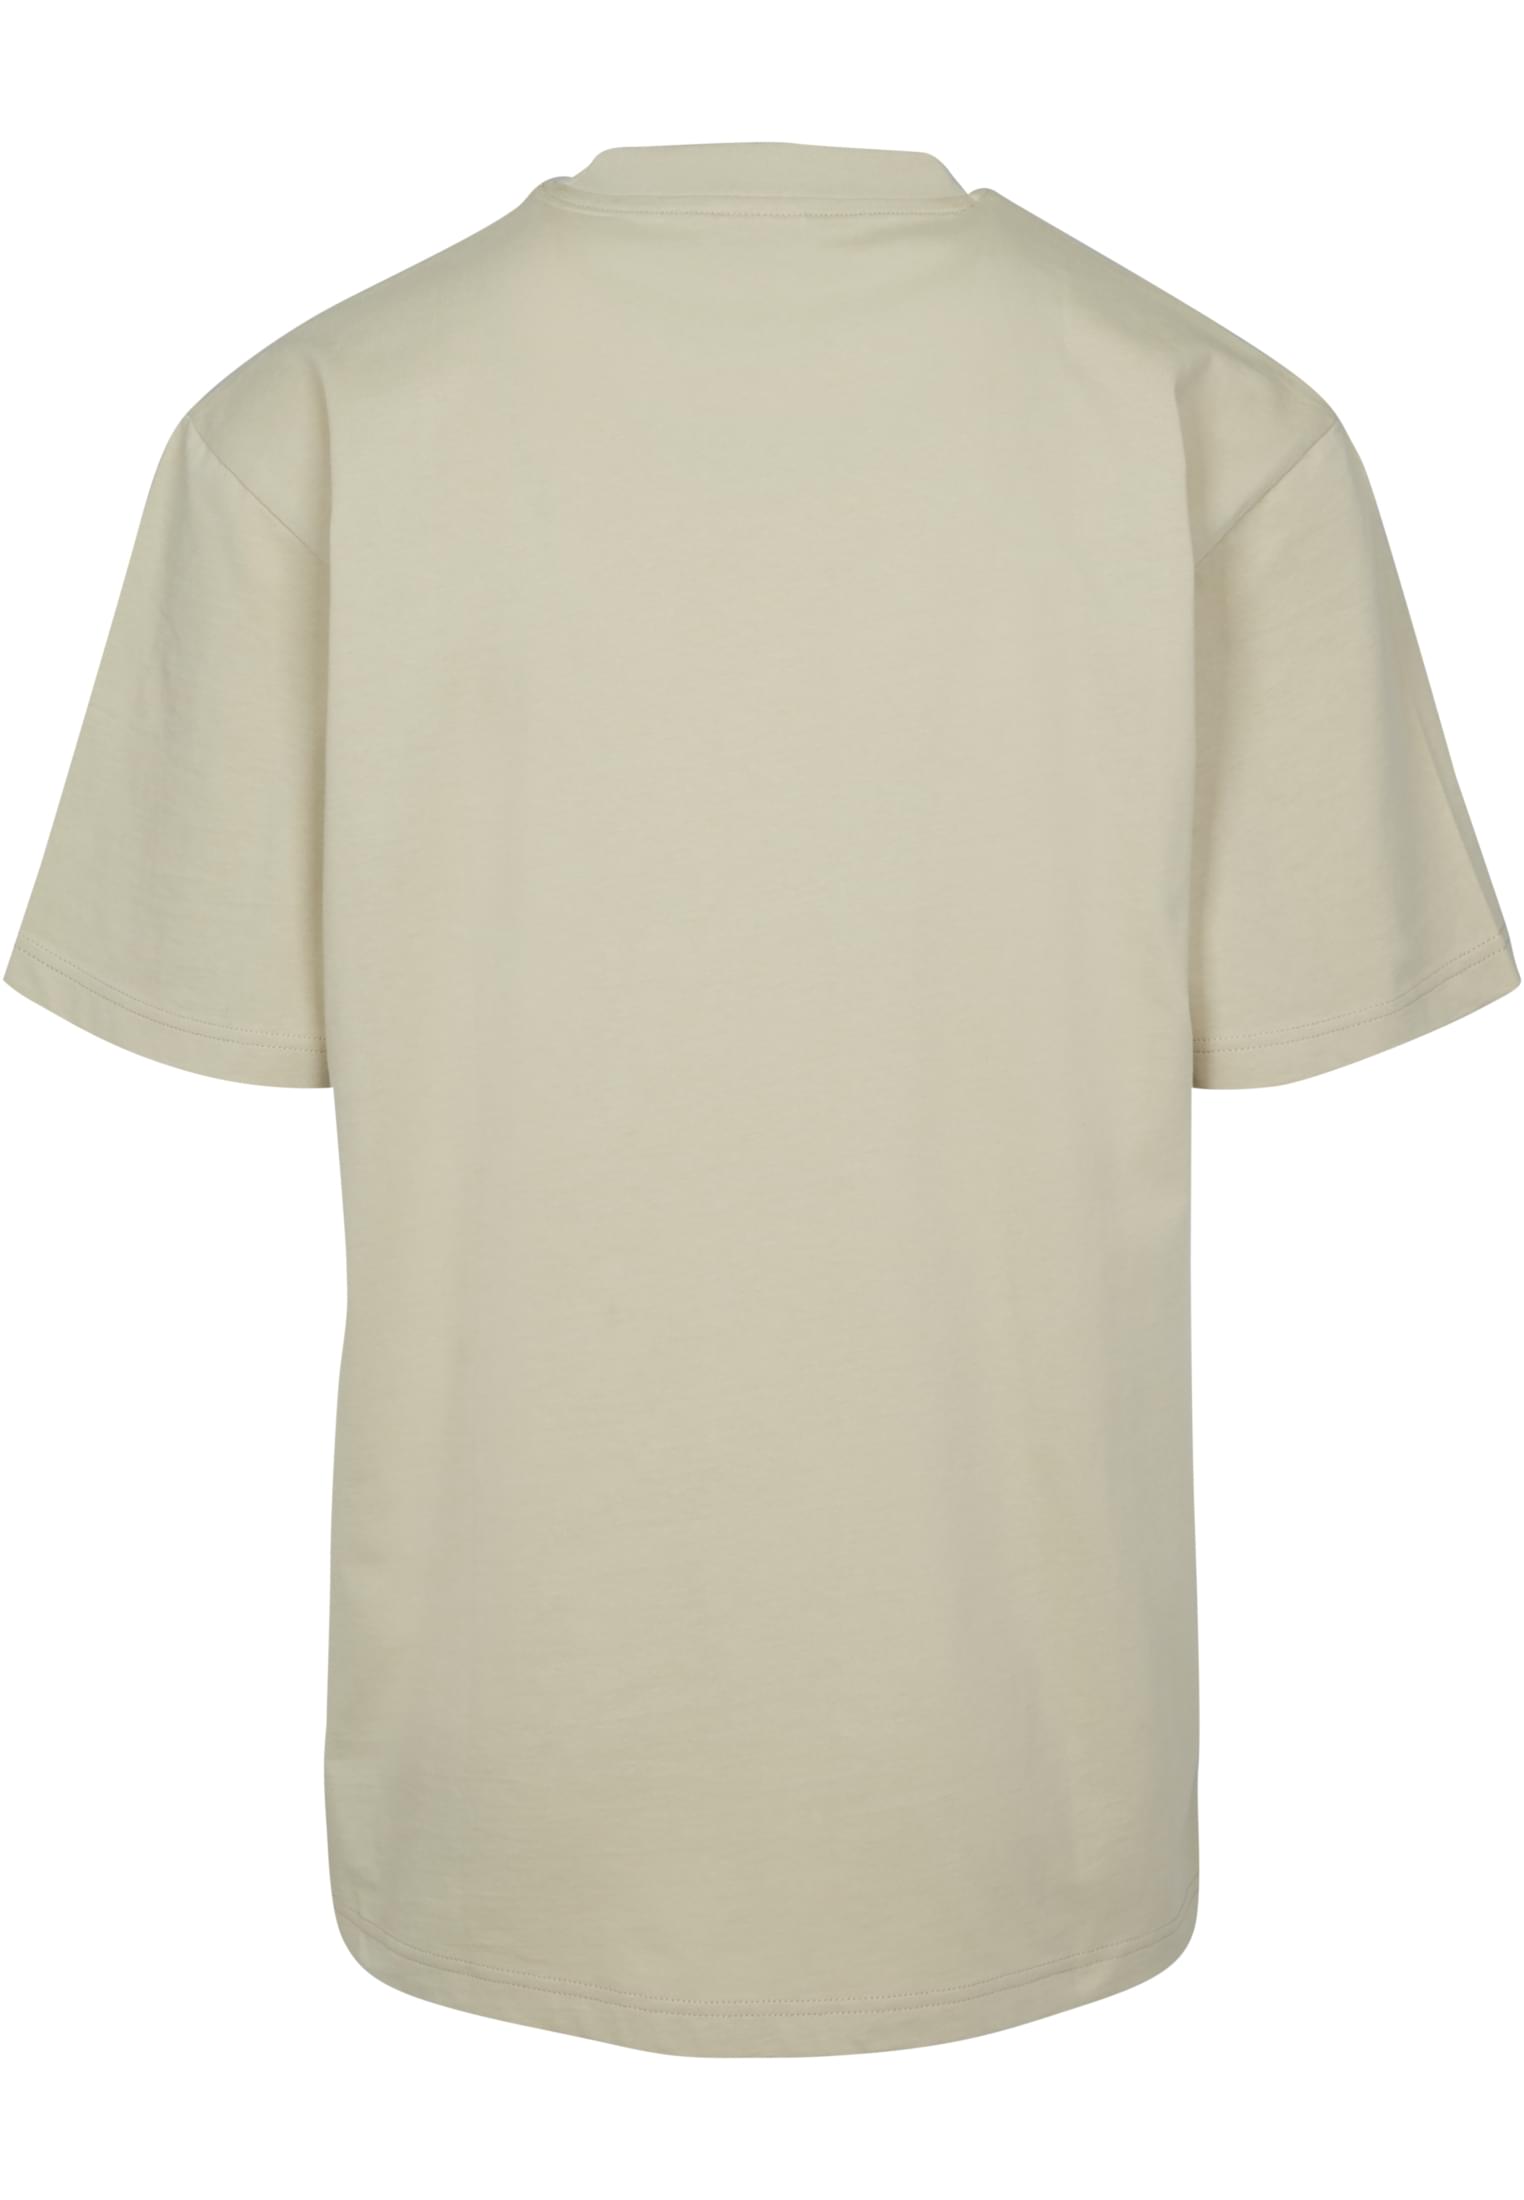 Plus Size Tall Tee in Farbe concrete